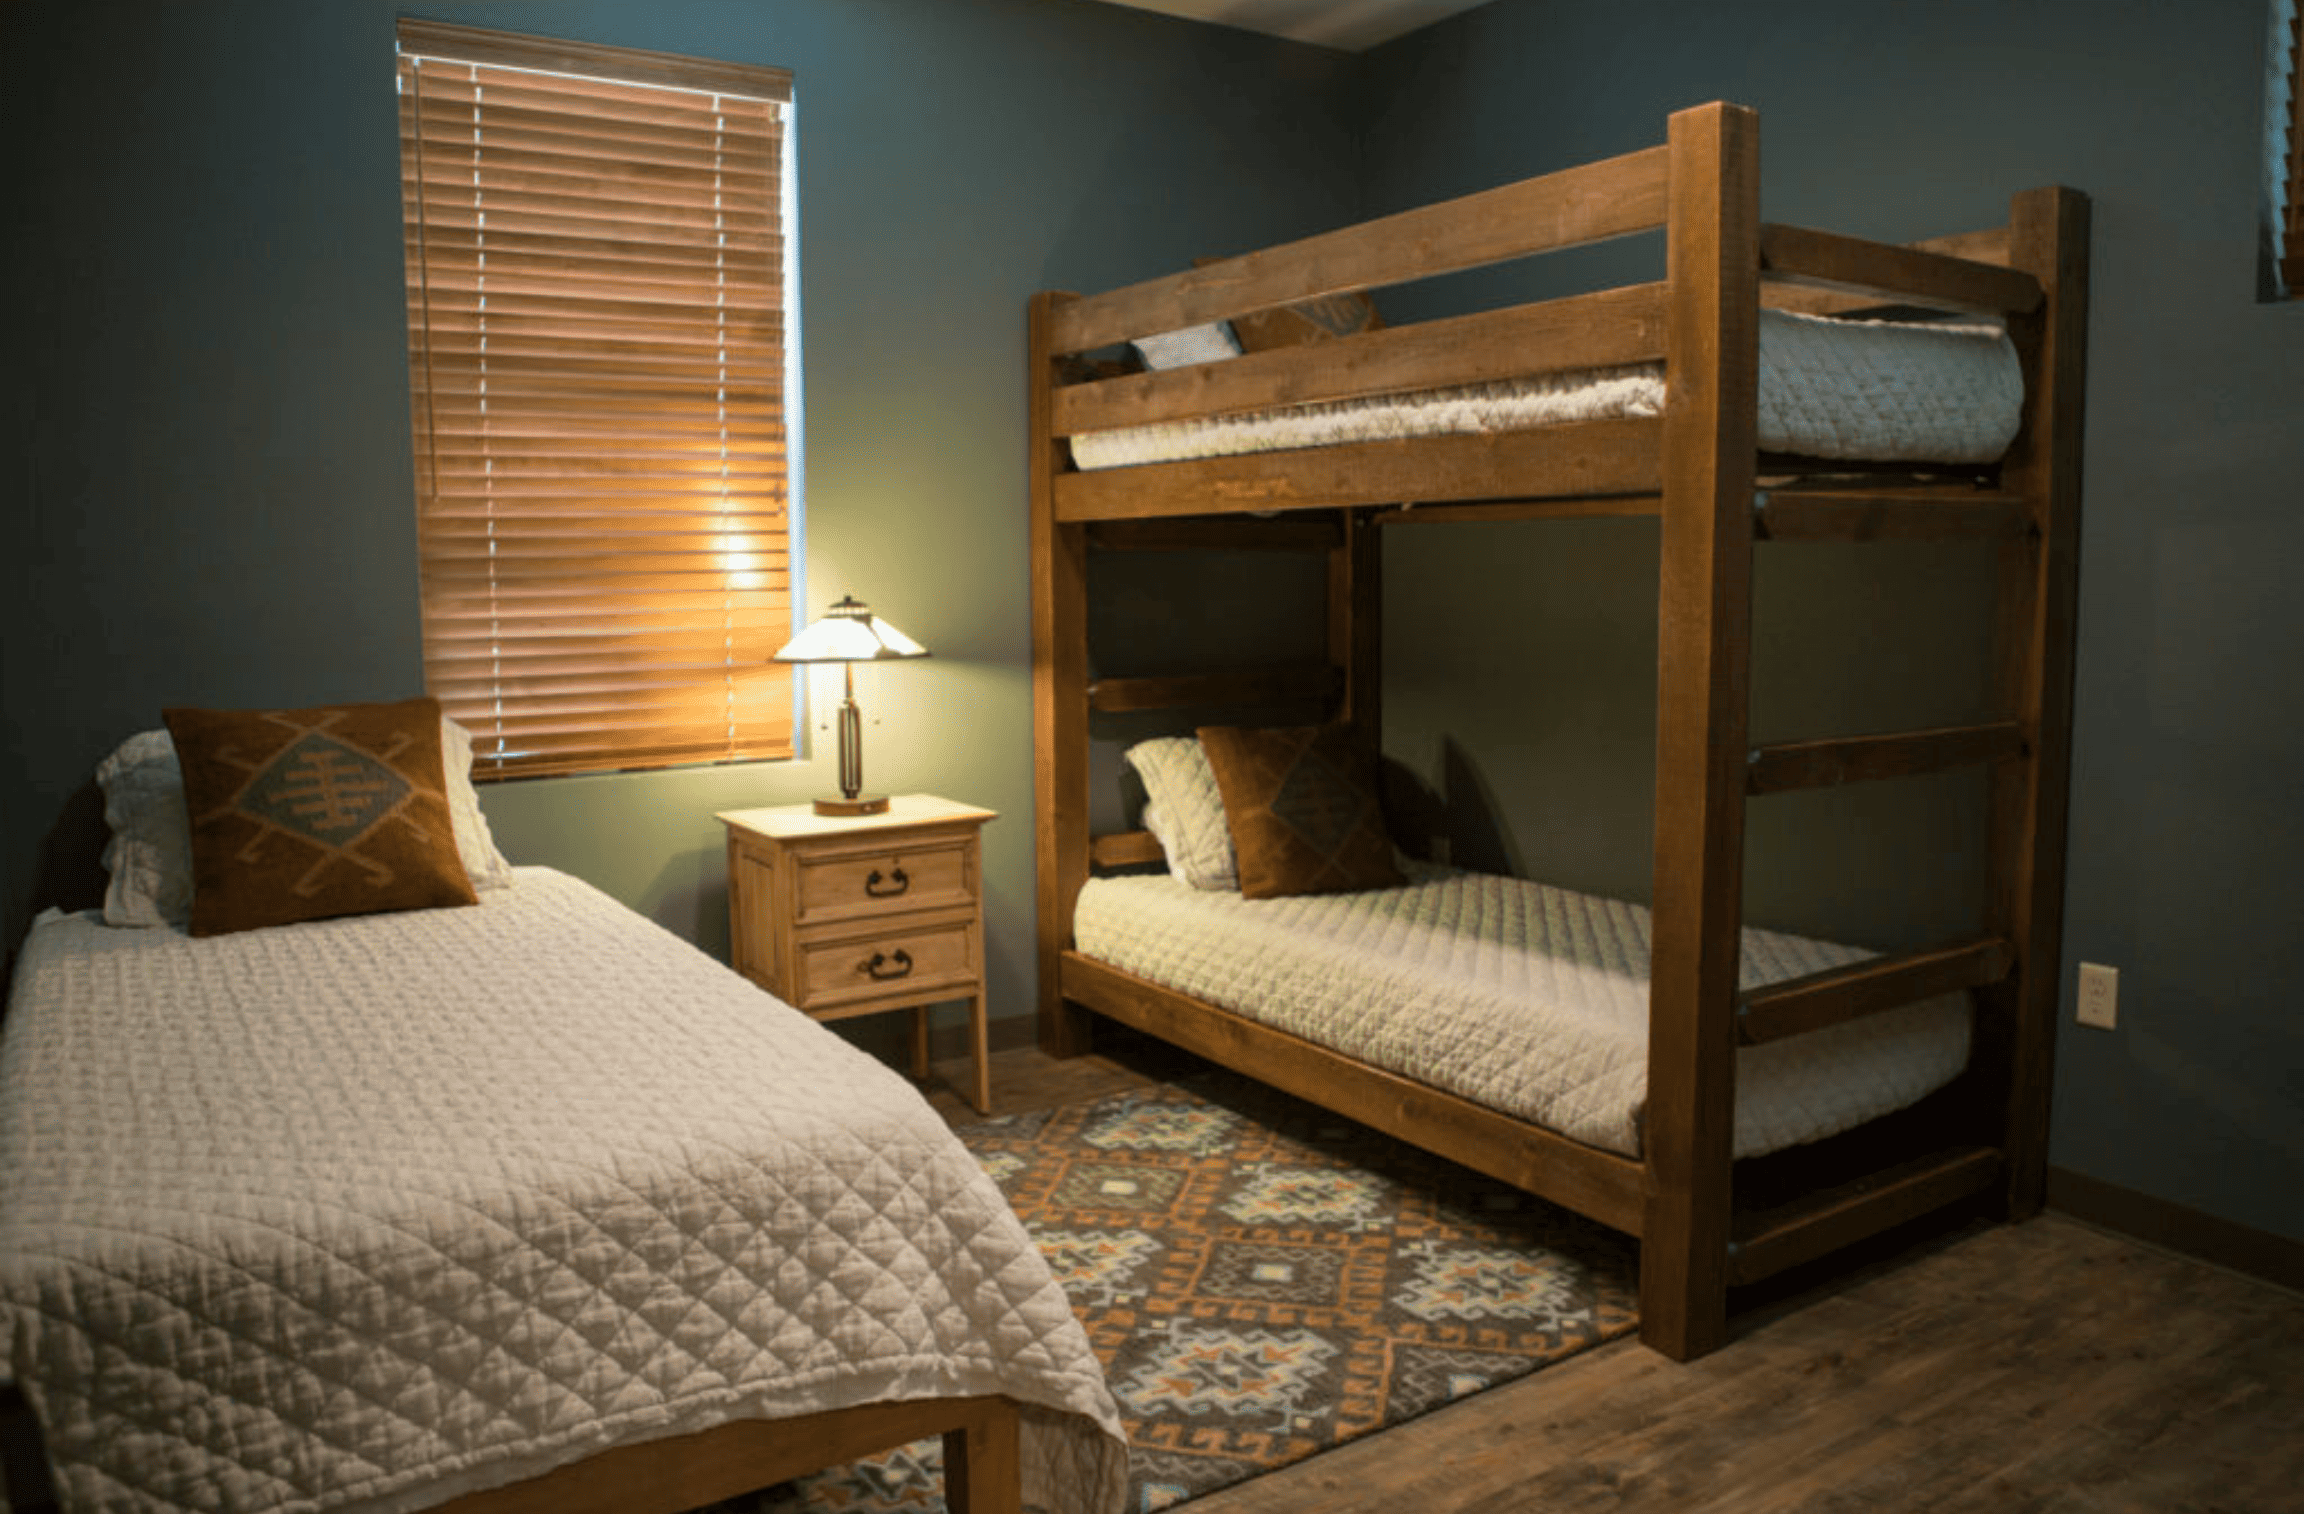 bedroom with queen size bed and two bunk beds with a nightstand in the middle